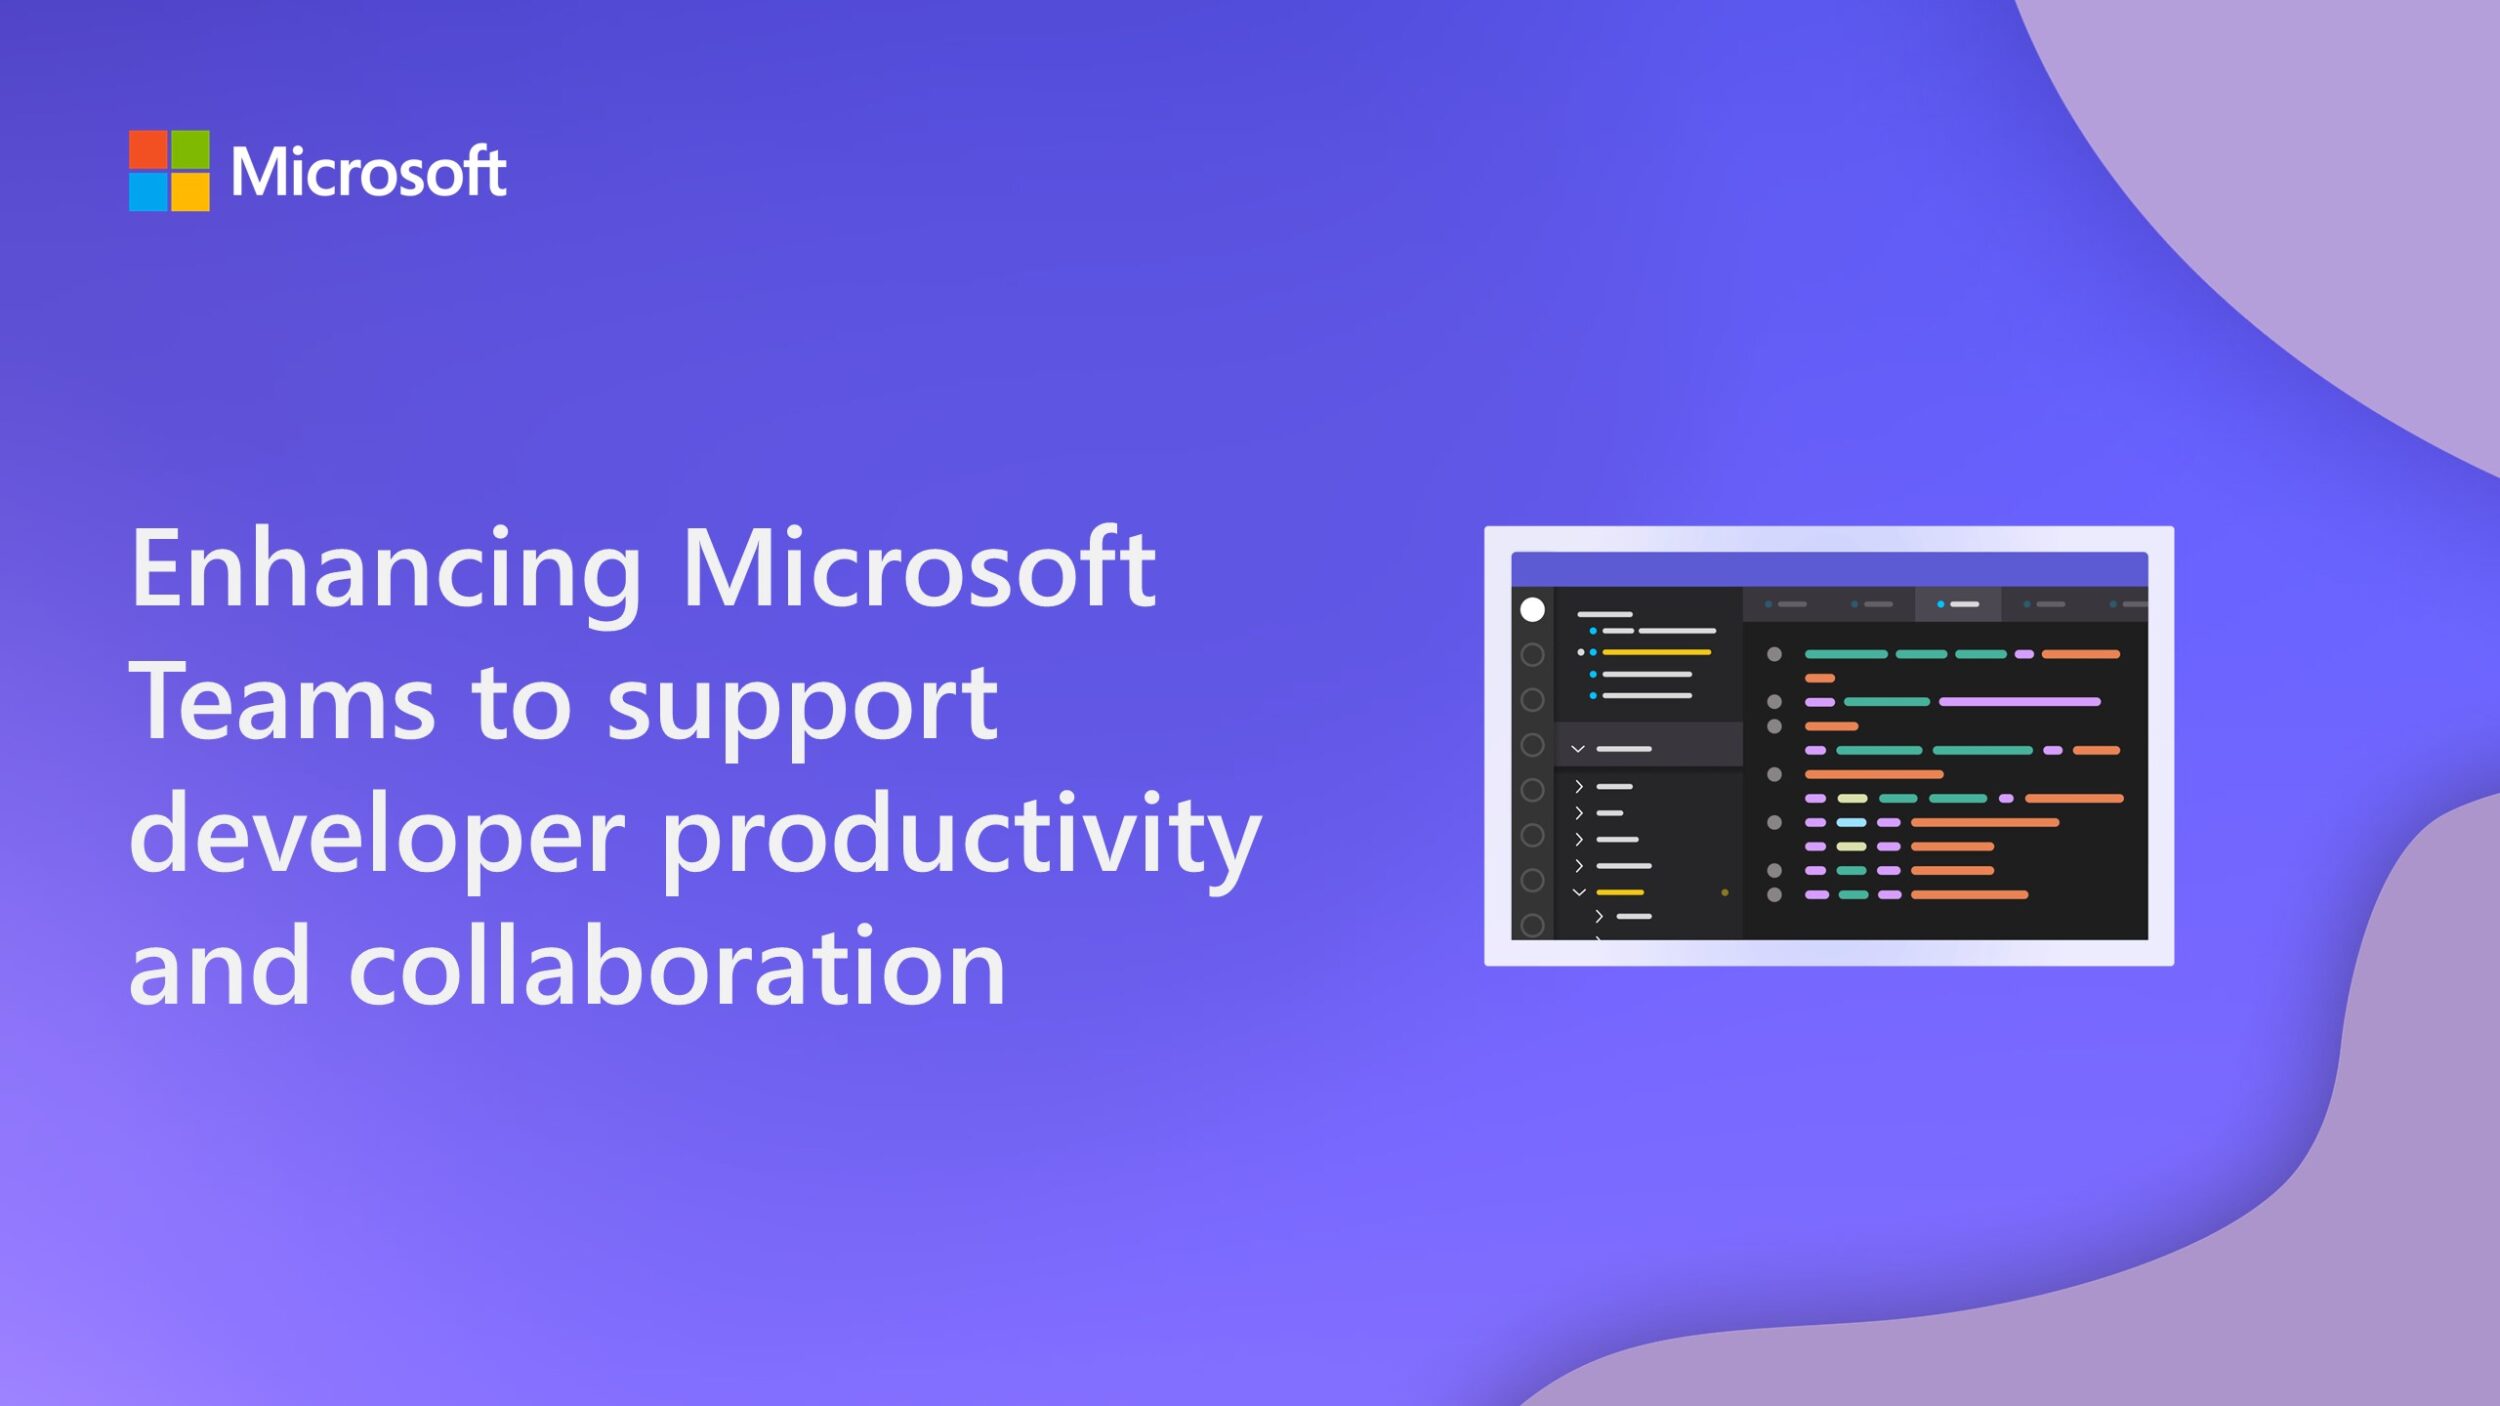 Enhancing Microsoft Teams to support developer productivity and collaboration